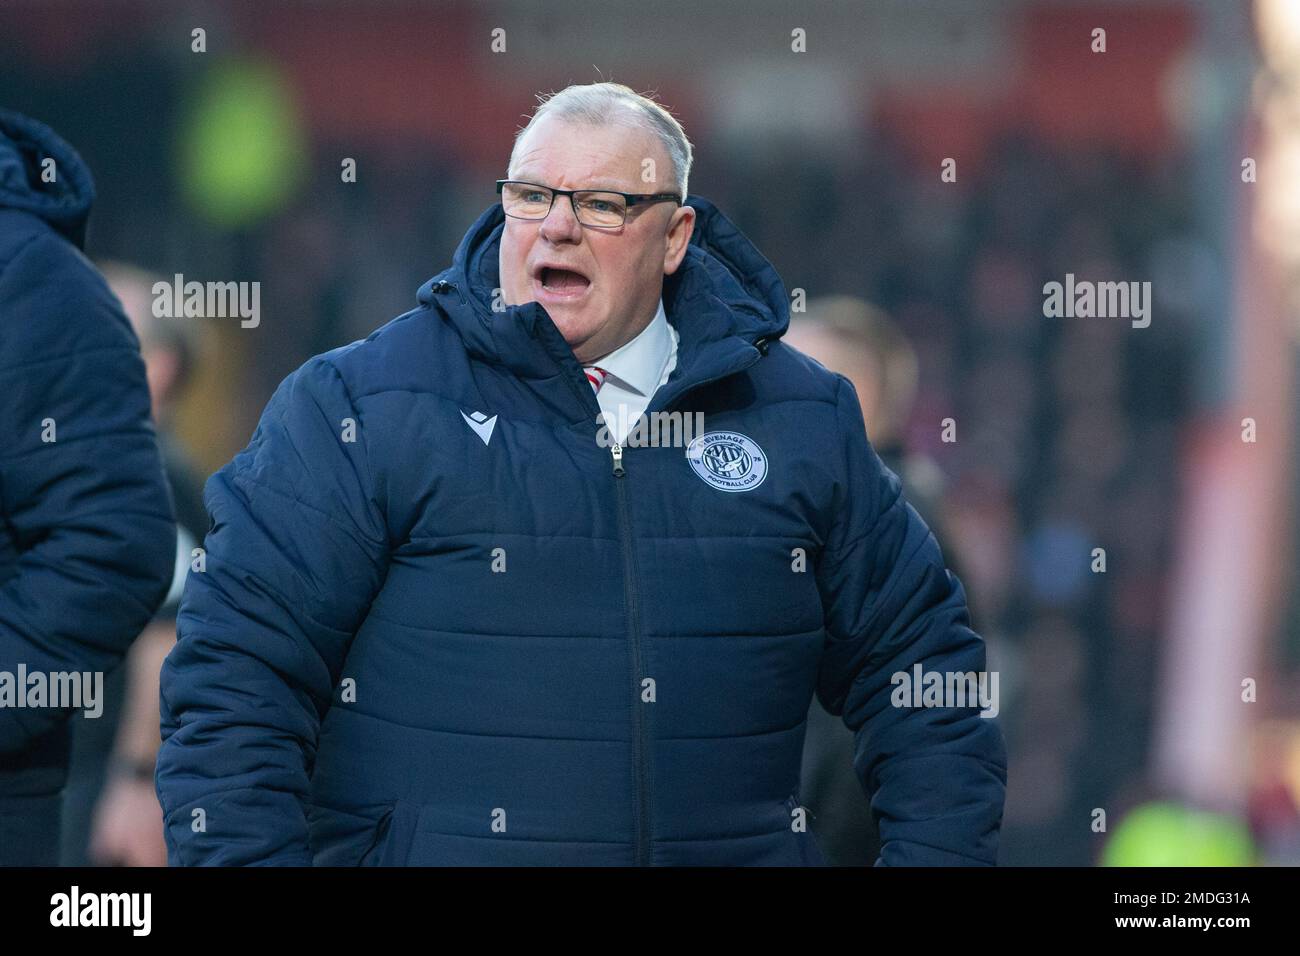 Stevenage FC manager / head coach Steve Evans shouting from touchline during game Stock Photo